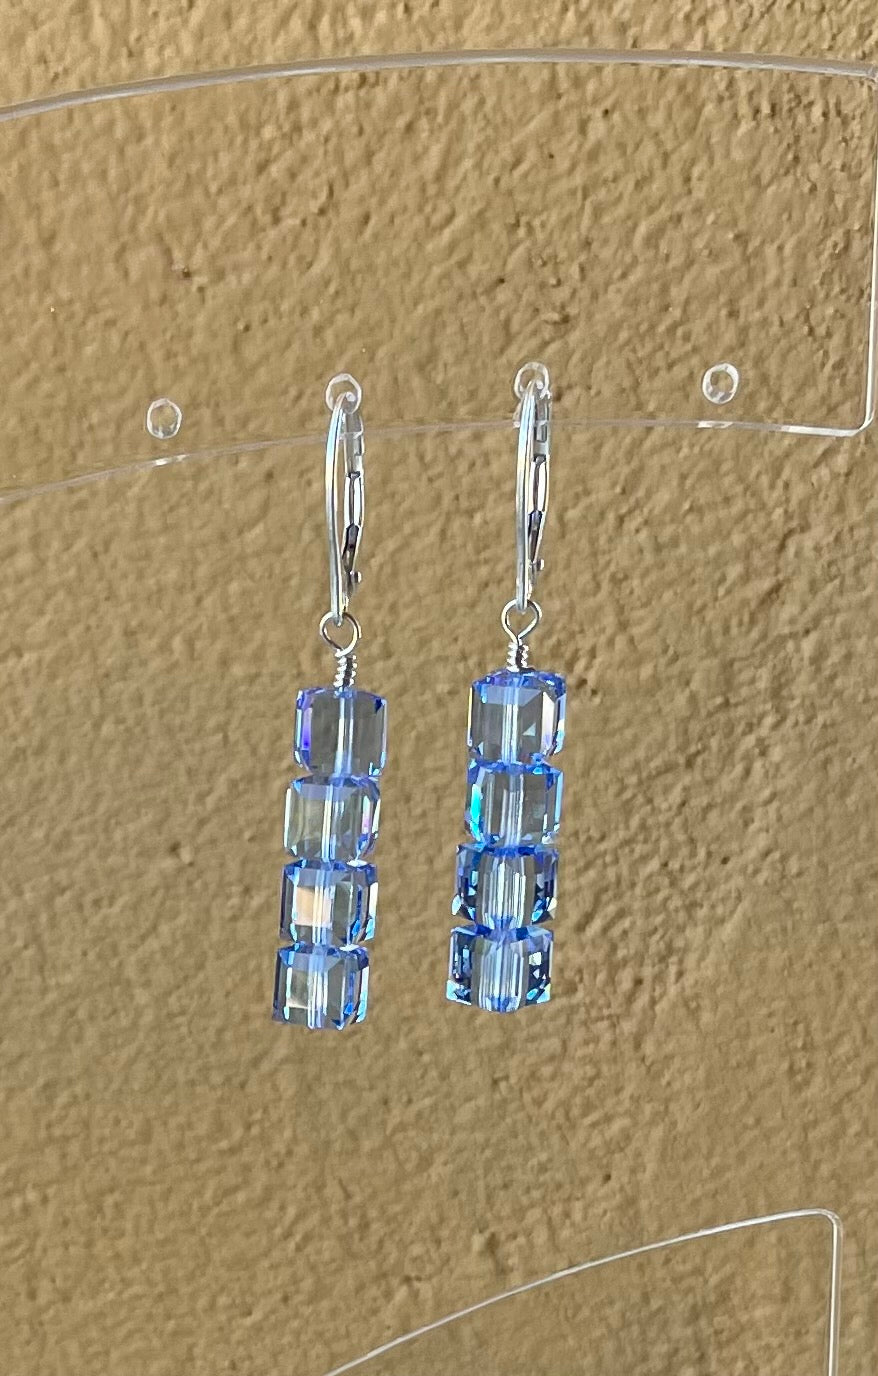 Earrings - Sterling Silver with Blue Swarovski Crystals